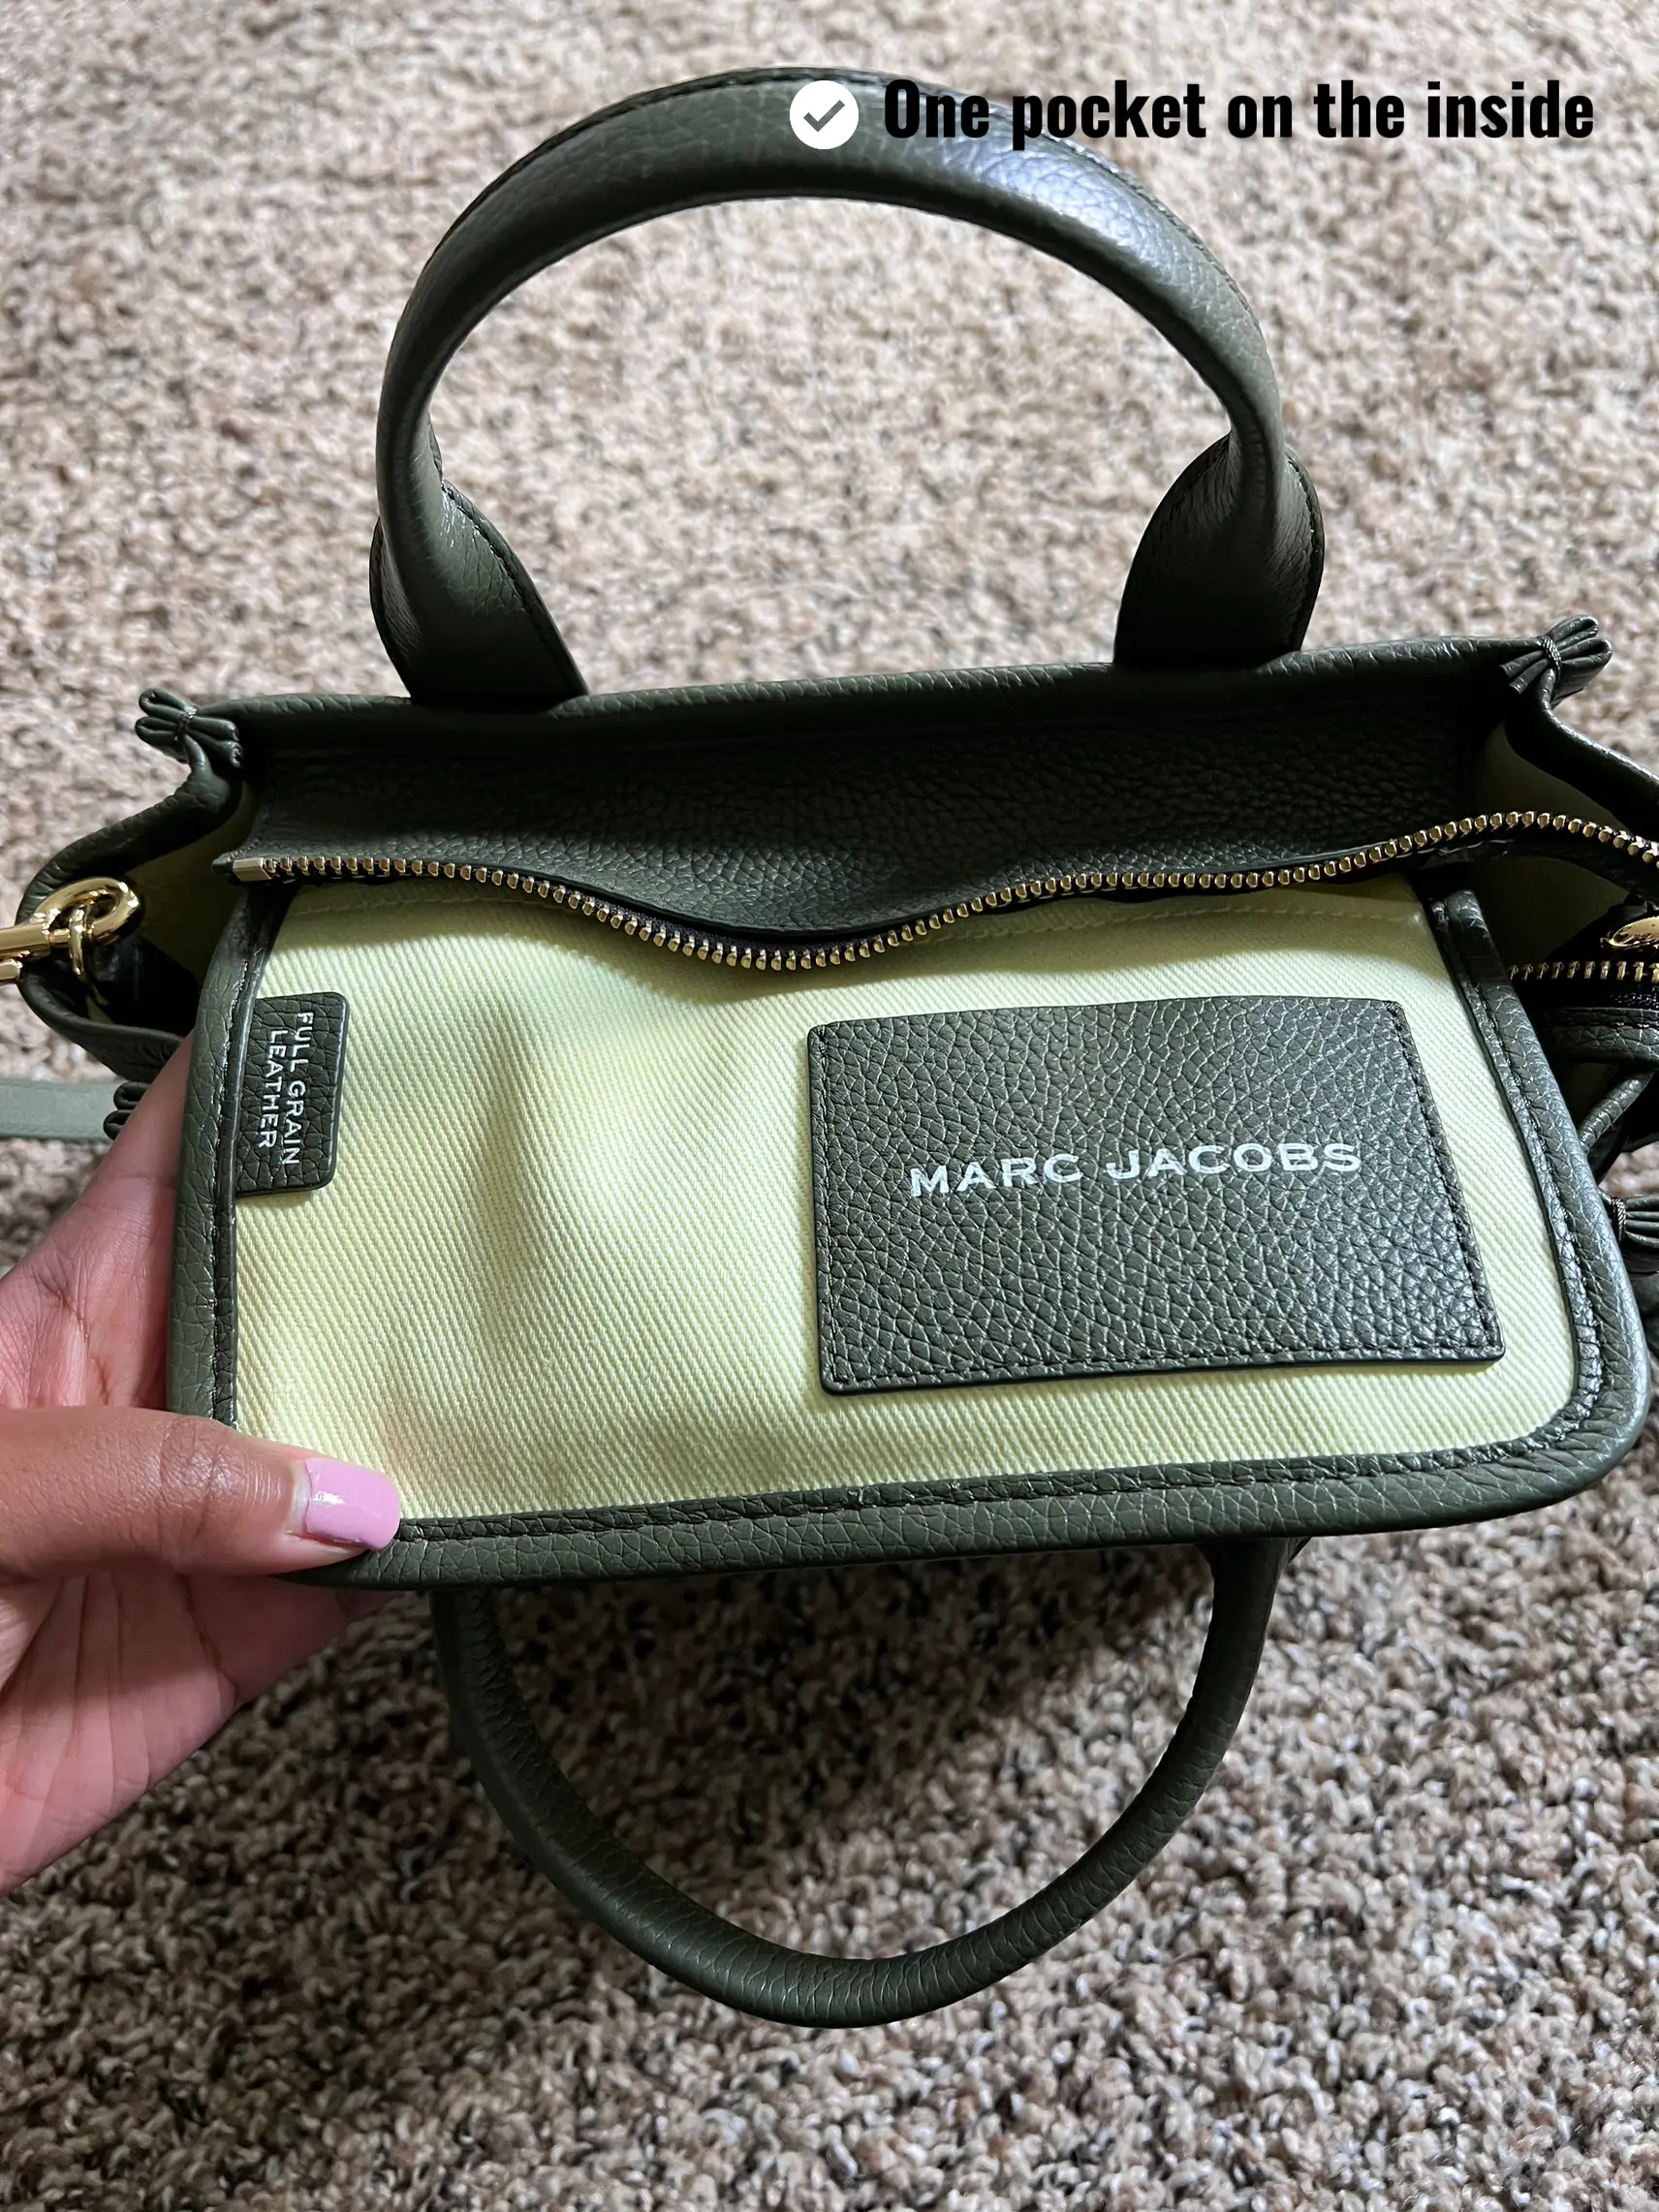 MARC JACOBS MINI LEATHER TOTE BAG CEMENT UNBOXING - FIRST